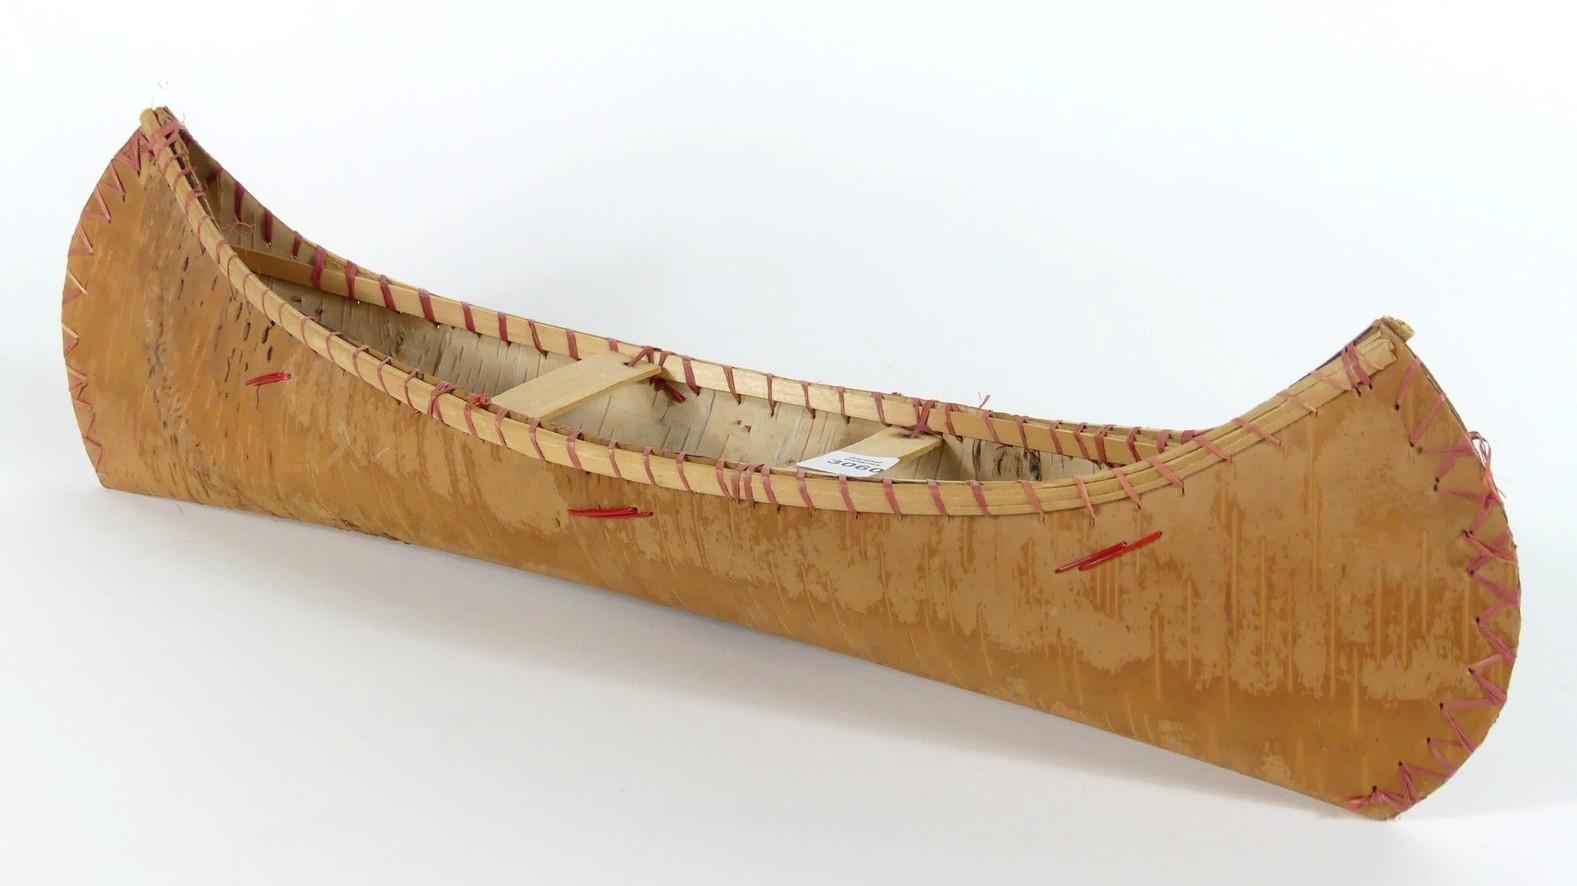 BIRCH BARK CANOE MODEL WITH PORCUPINE QUILL DECORATION